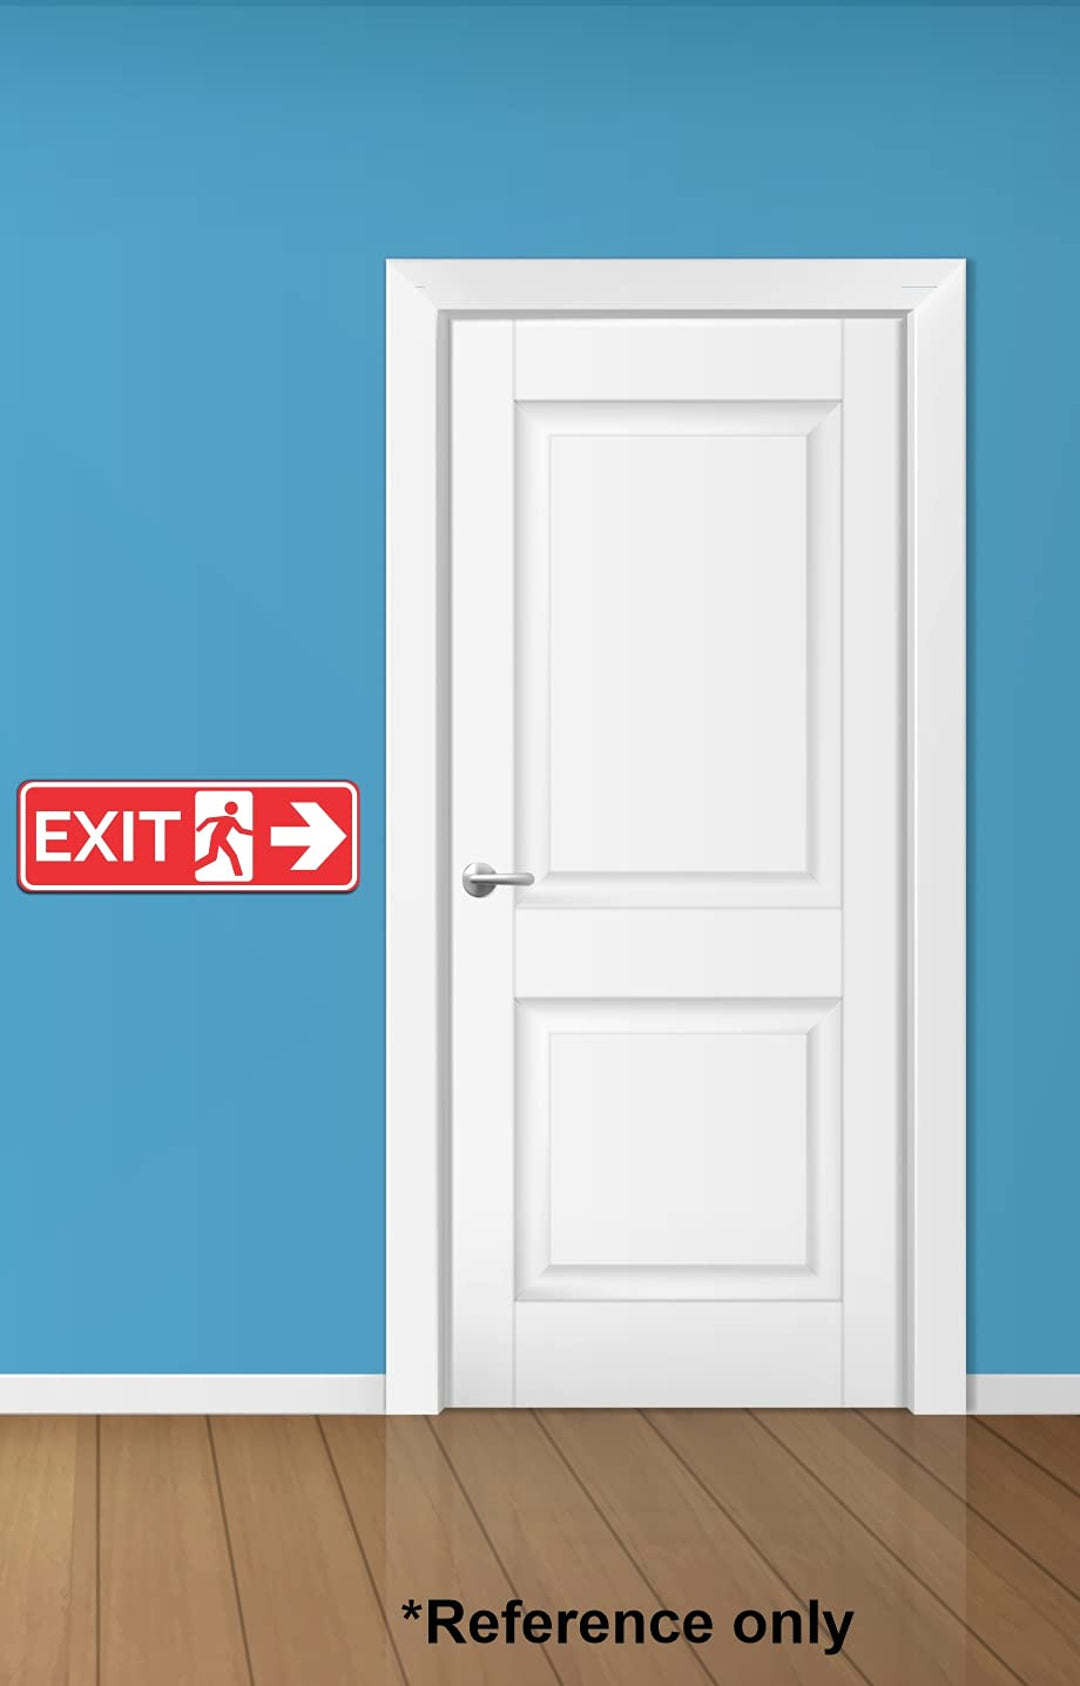 FIRE EXIT Safety Sign Board With Arrow (Up Down Right Left symbol )